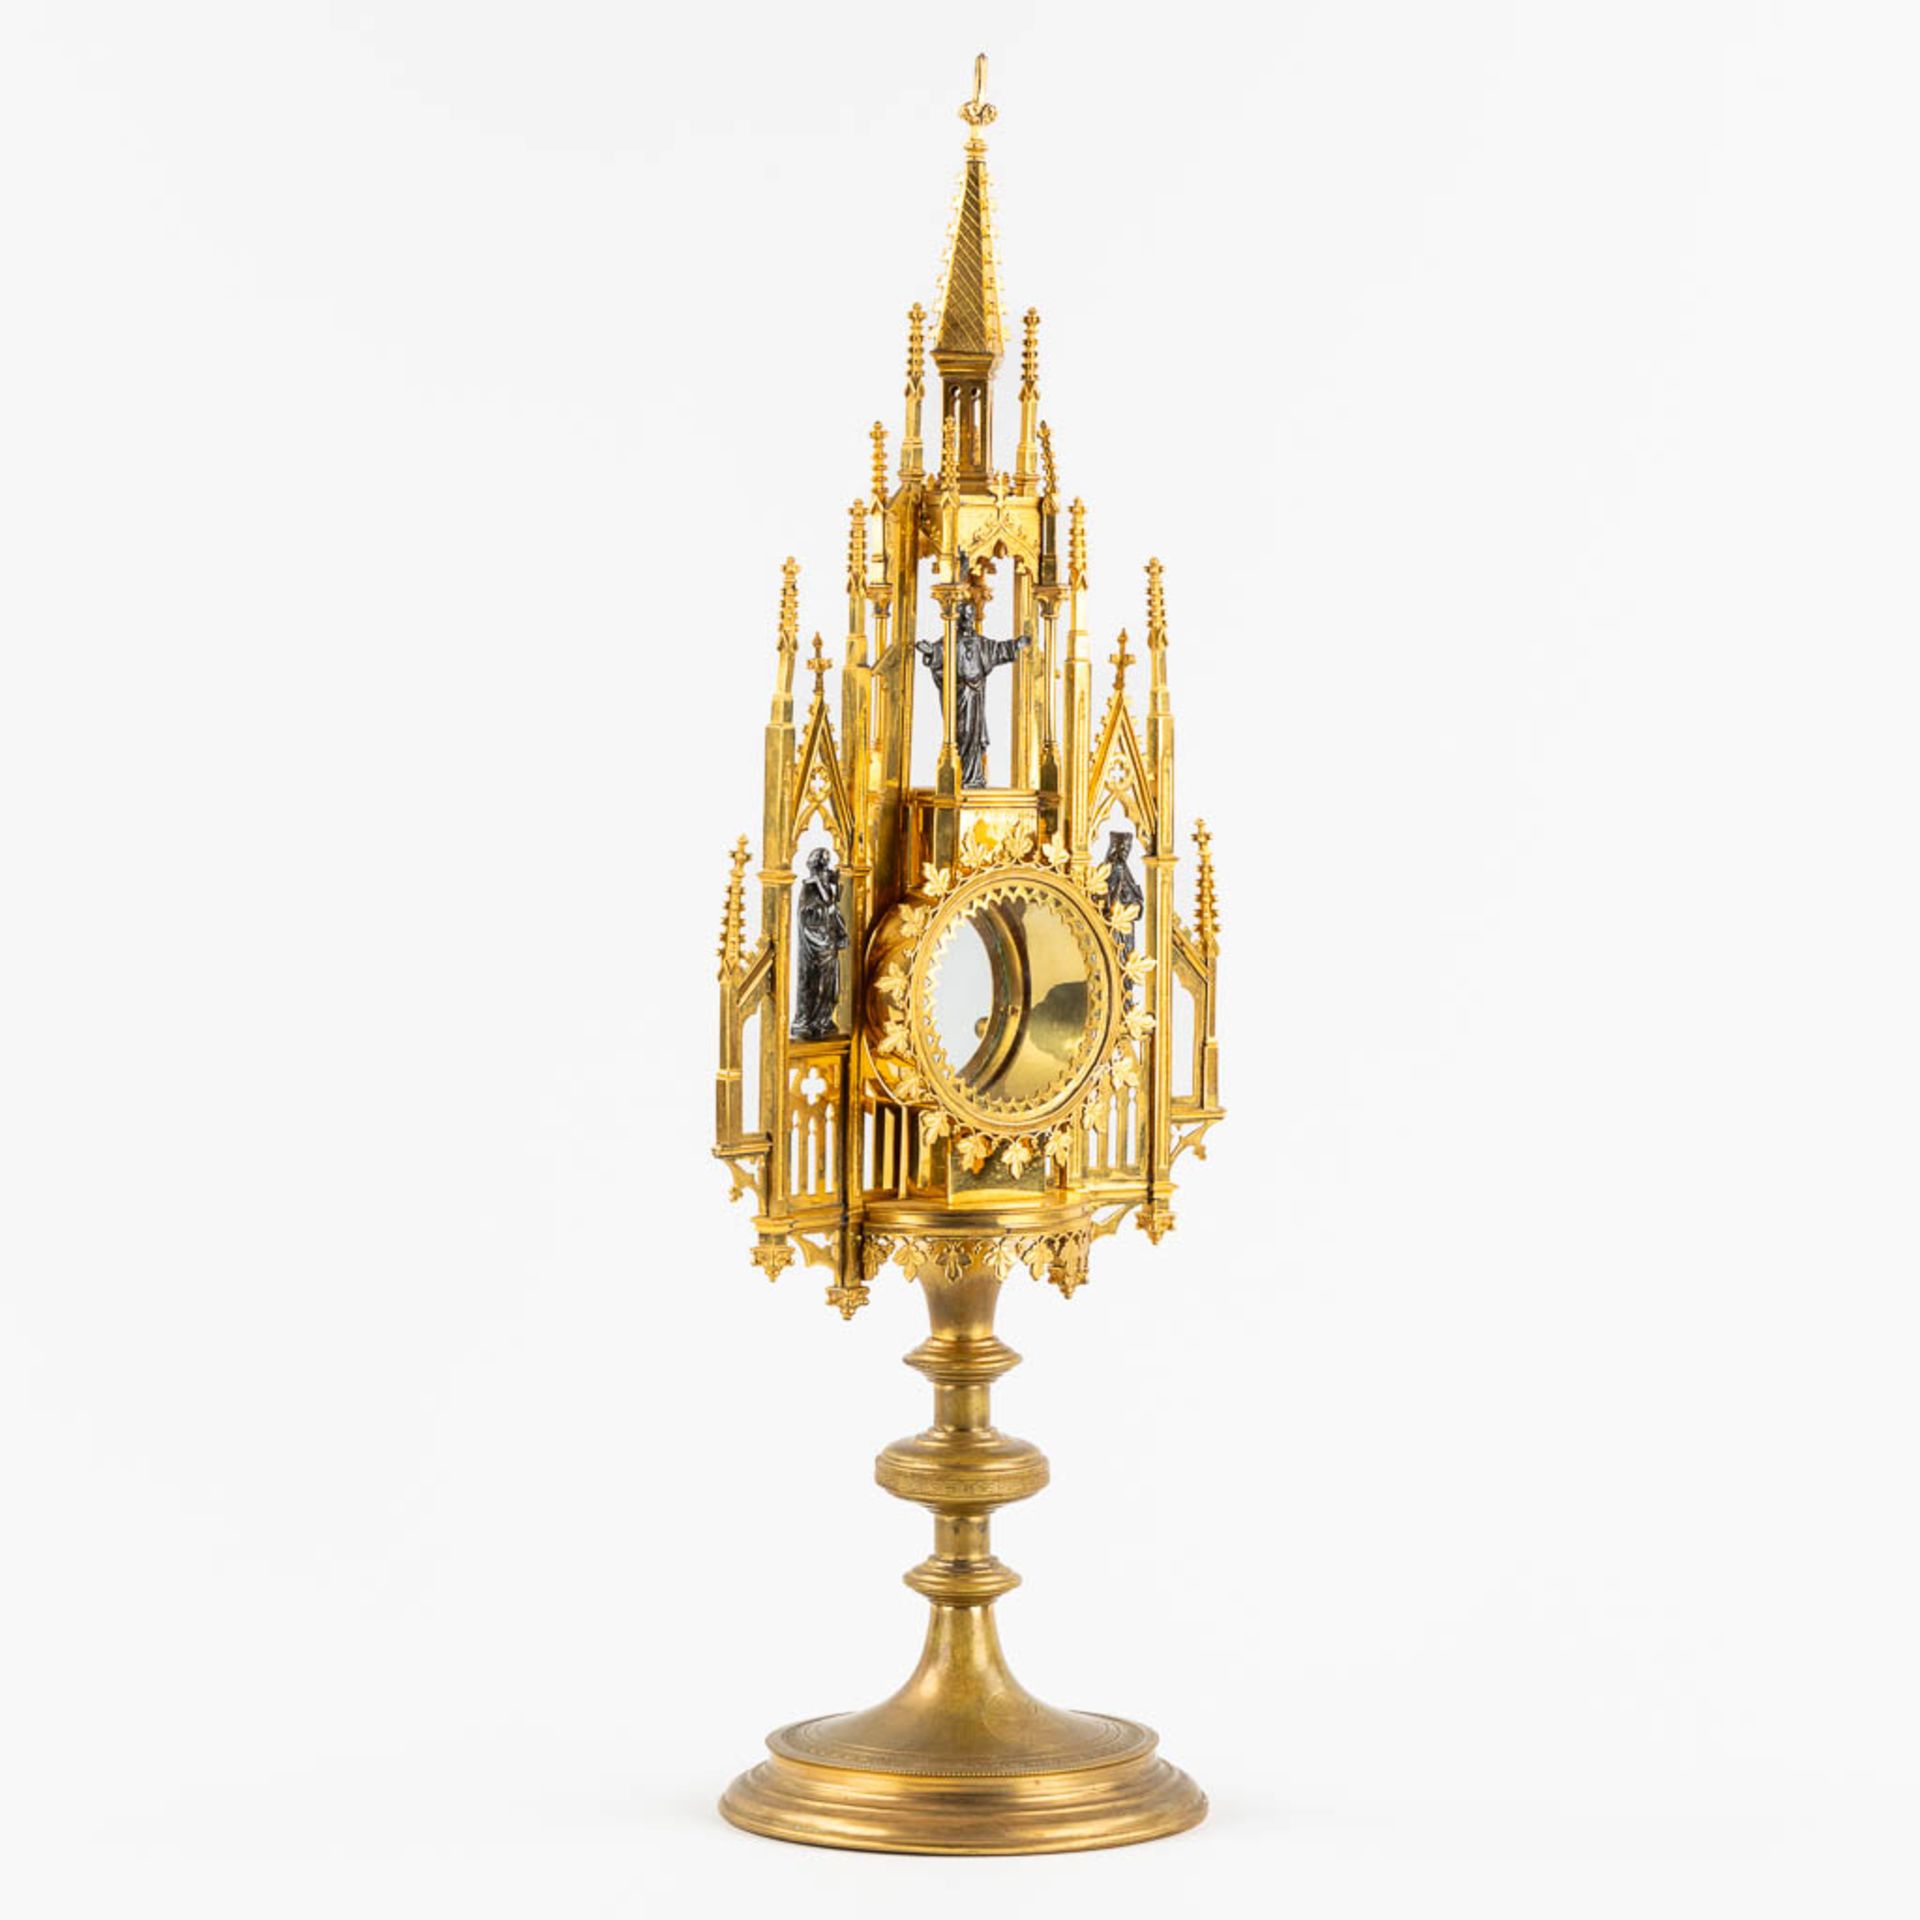 A Tower monstrance, gilt and silver plated brass, Gothic Revival. 19th C. (W:21,5 x H:58 cm) - Image 9 of 22